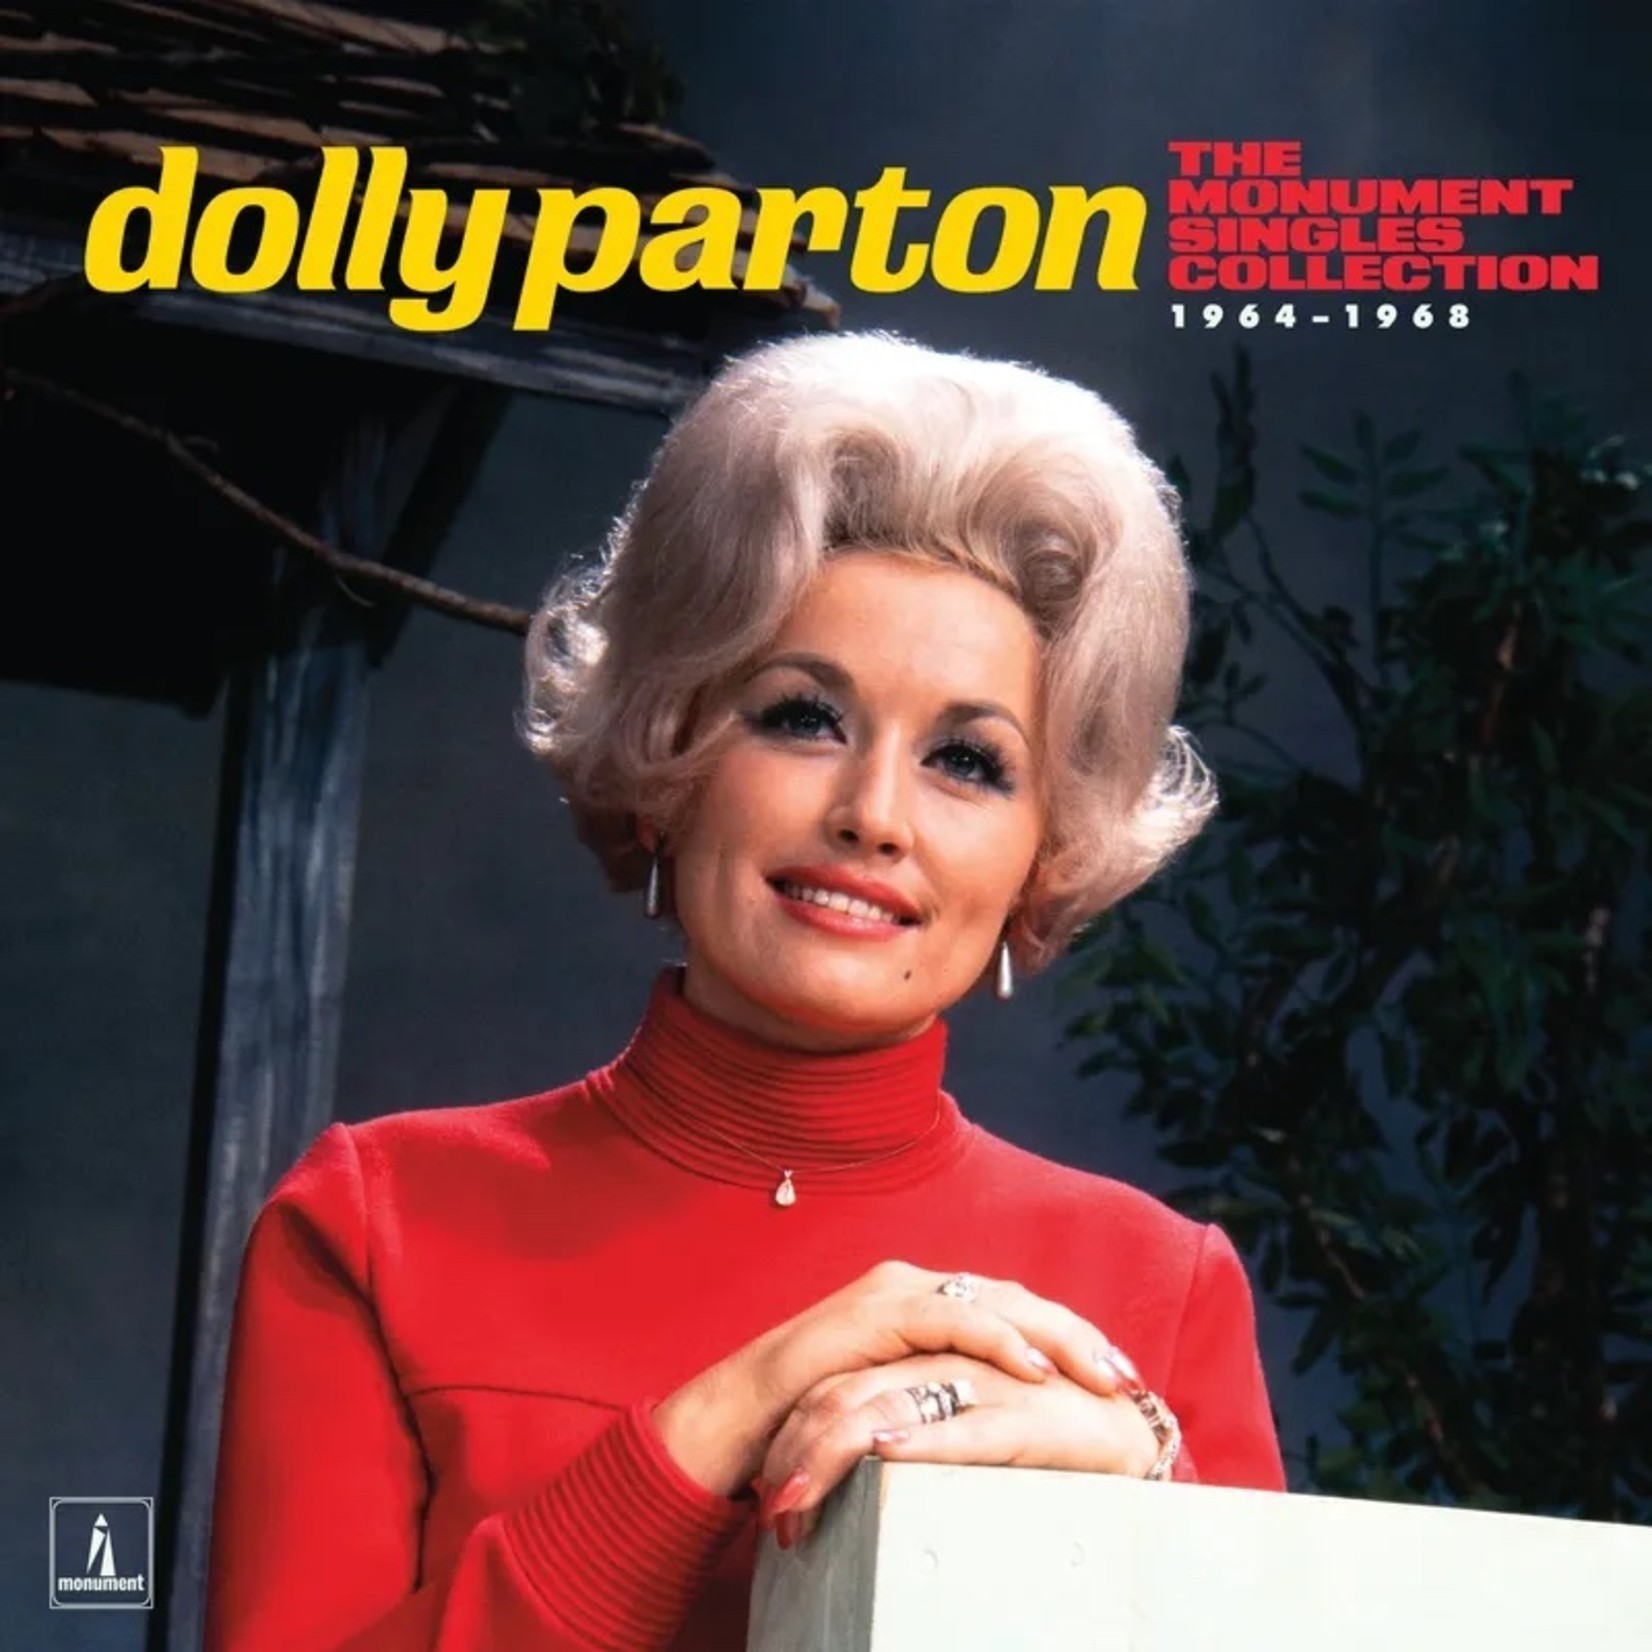 Vinyl Dolly Parton - The Monument Singles Collection 1964-1968 RSD2023